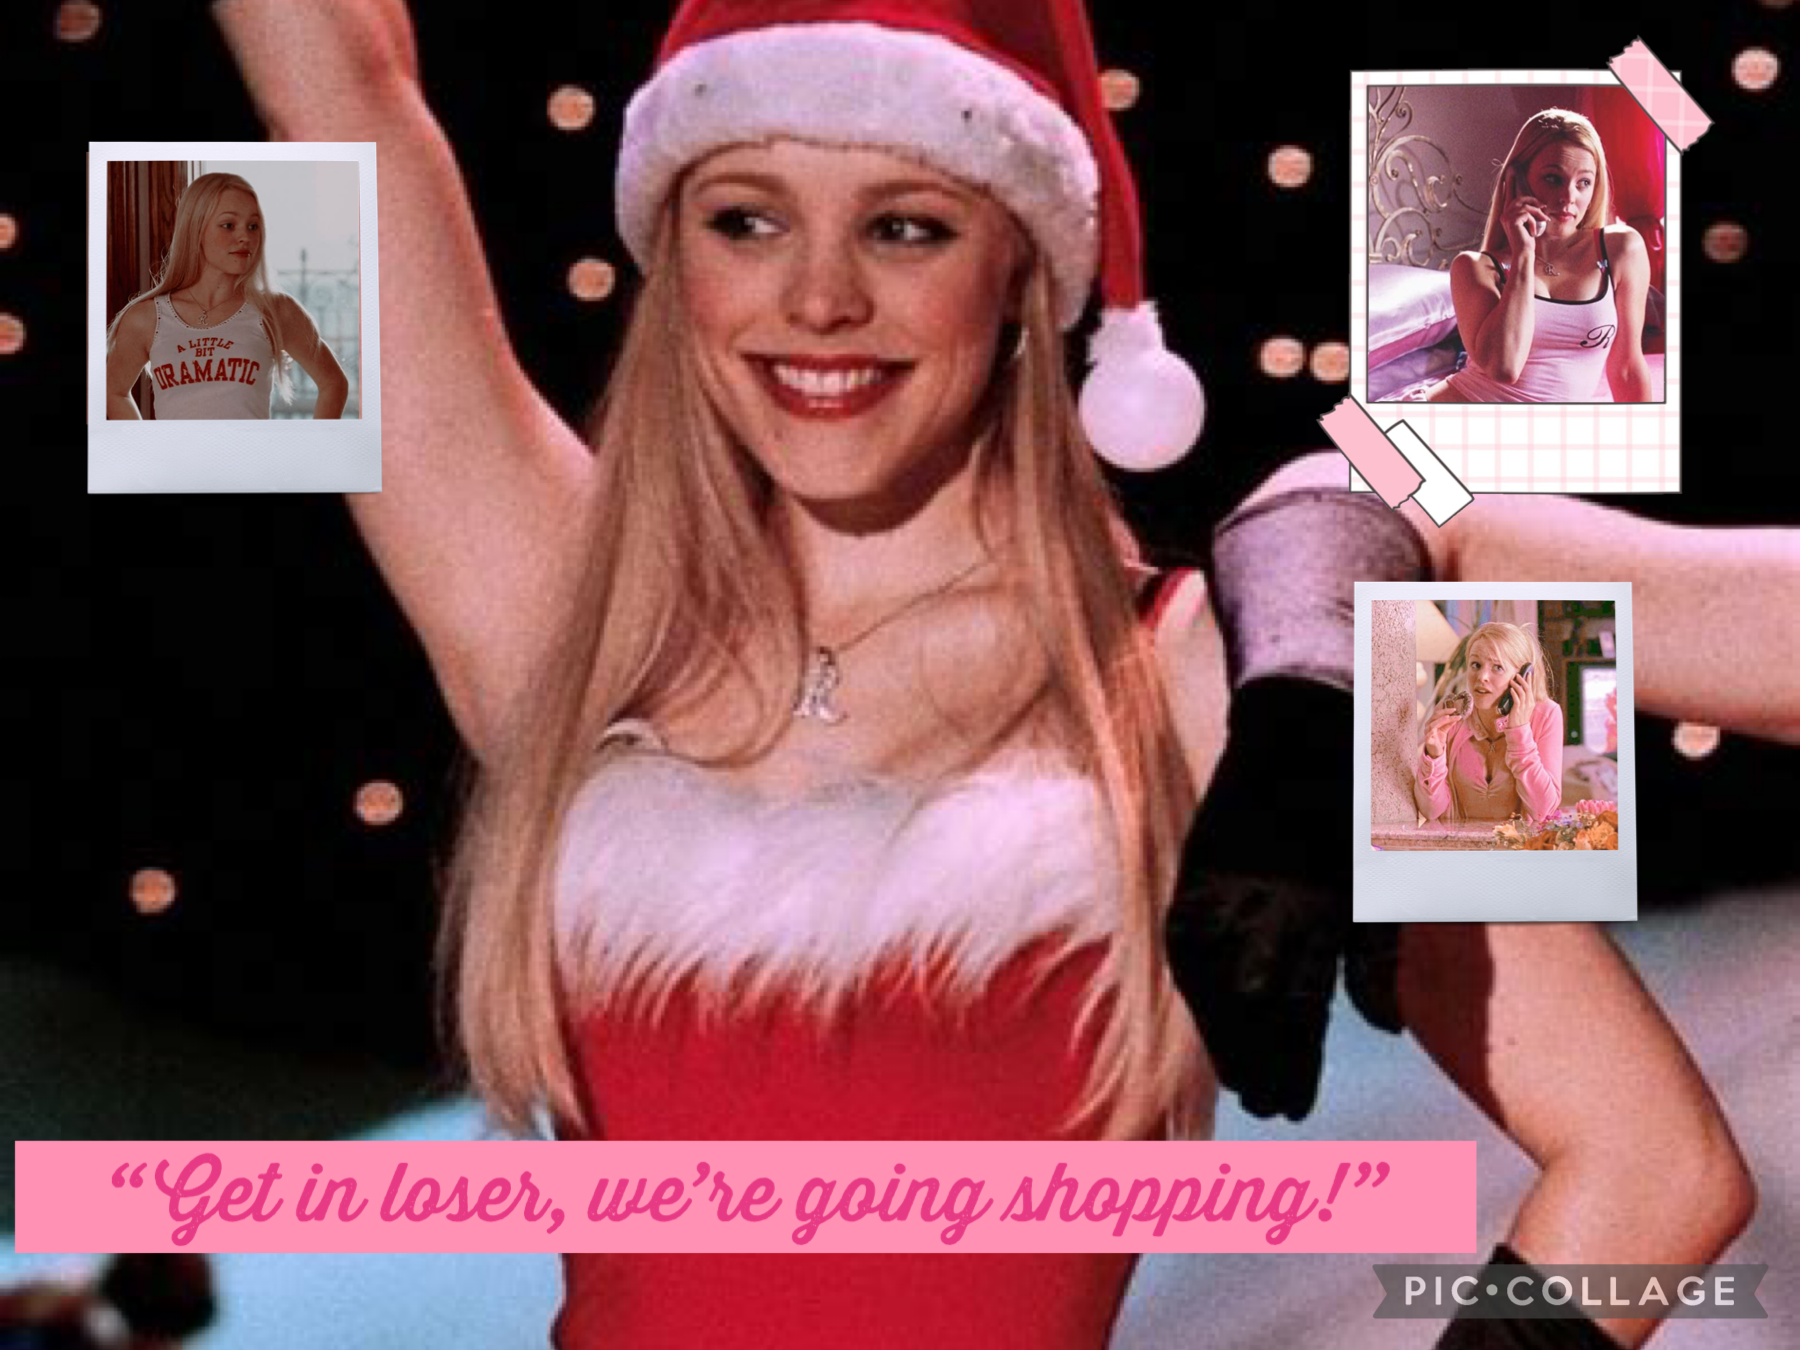 Tap me!!
Sorry it’s been a while guys…. I’ve been really busy!!! I’ve finally completed my Regina George collage and I hope u enjoy! My collection of Mean Girls is complete!